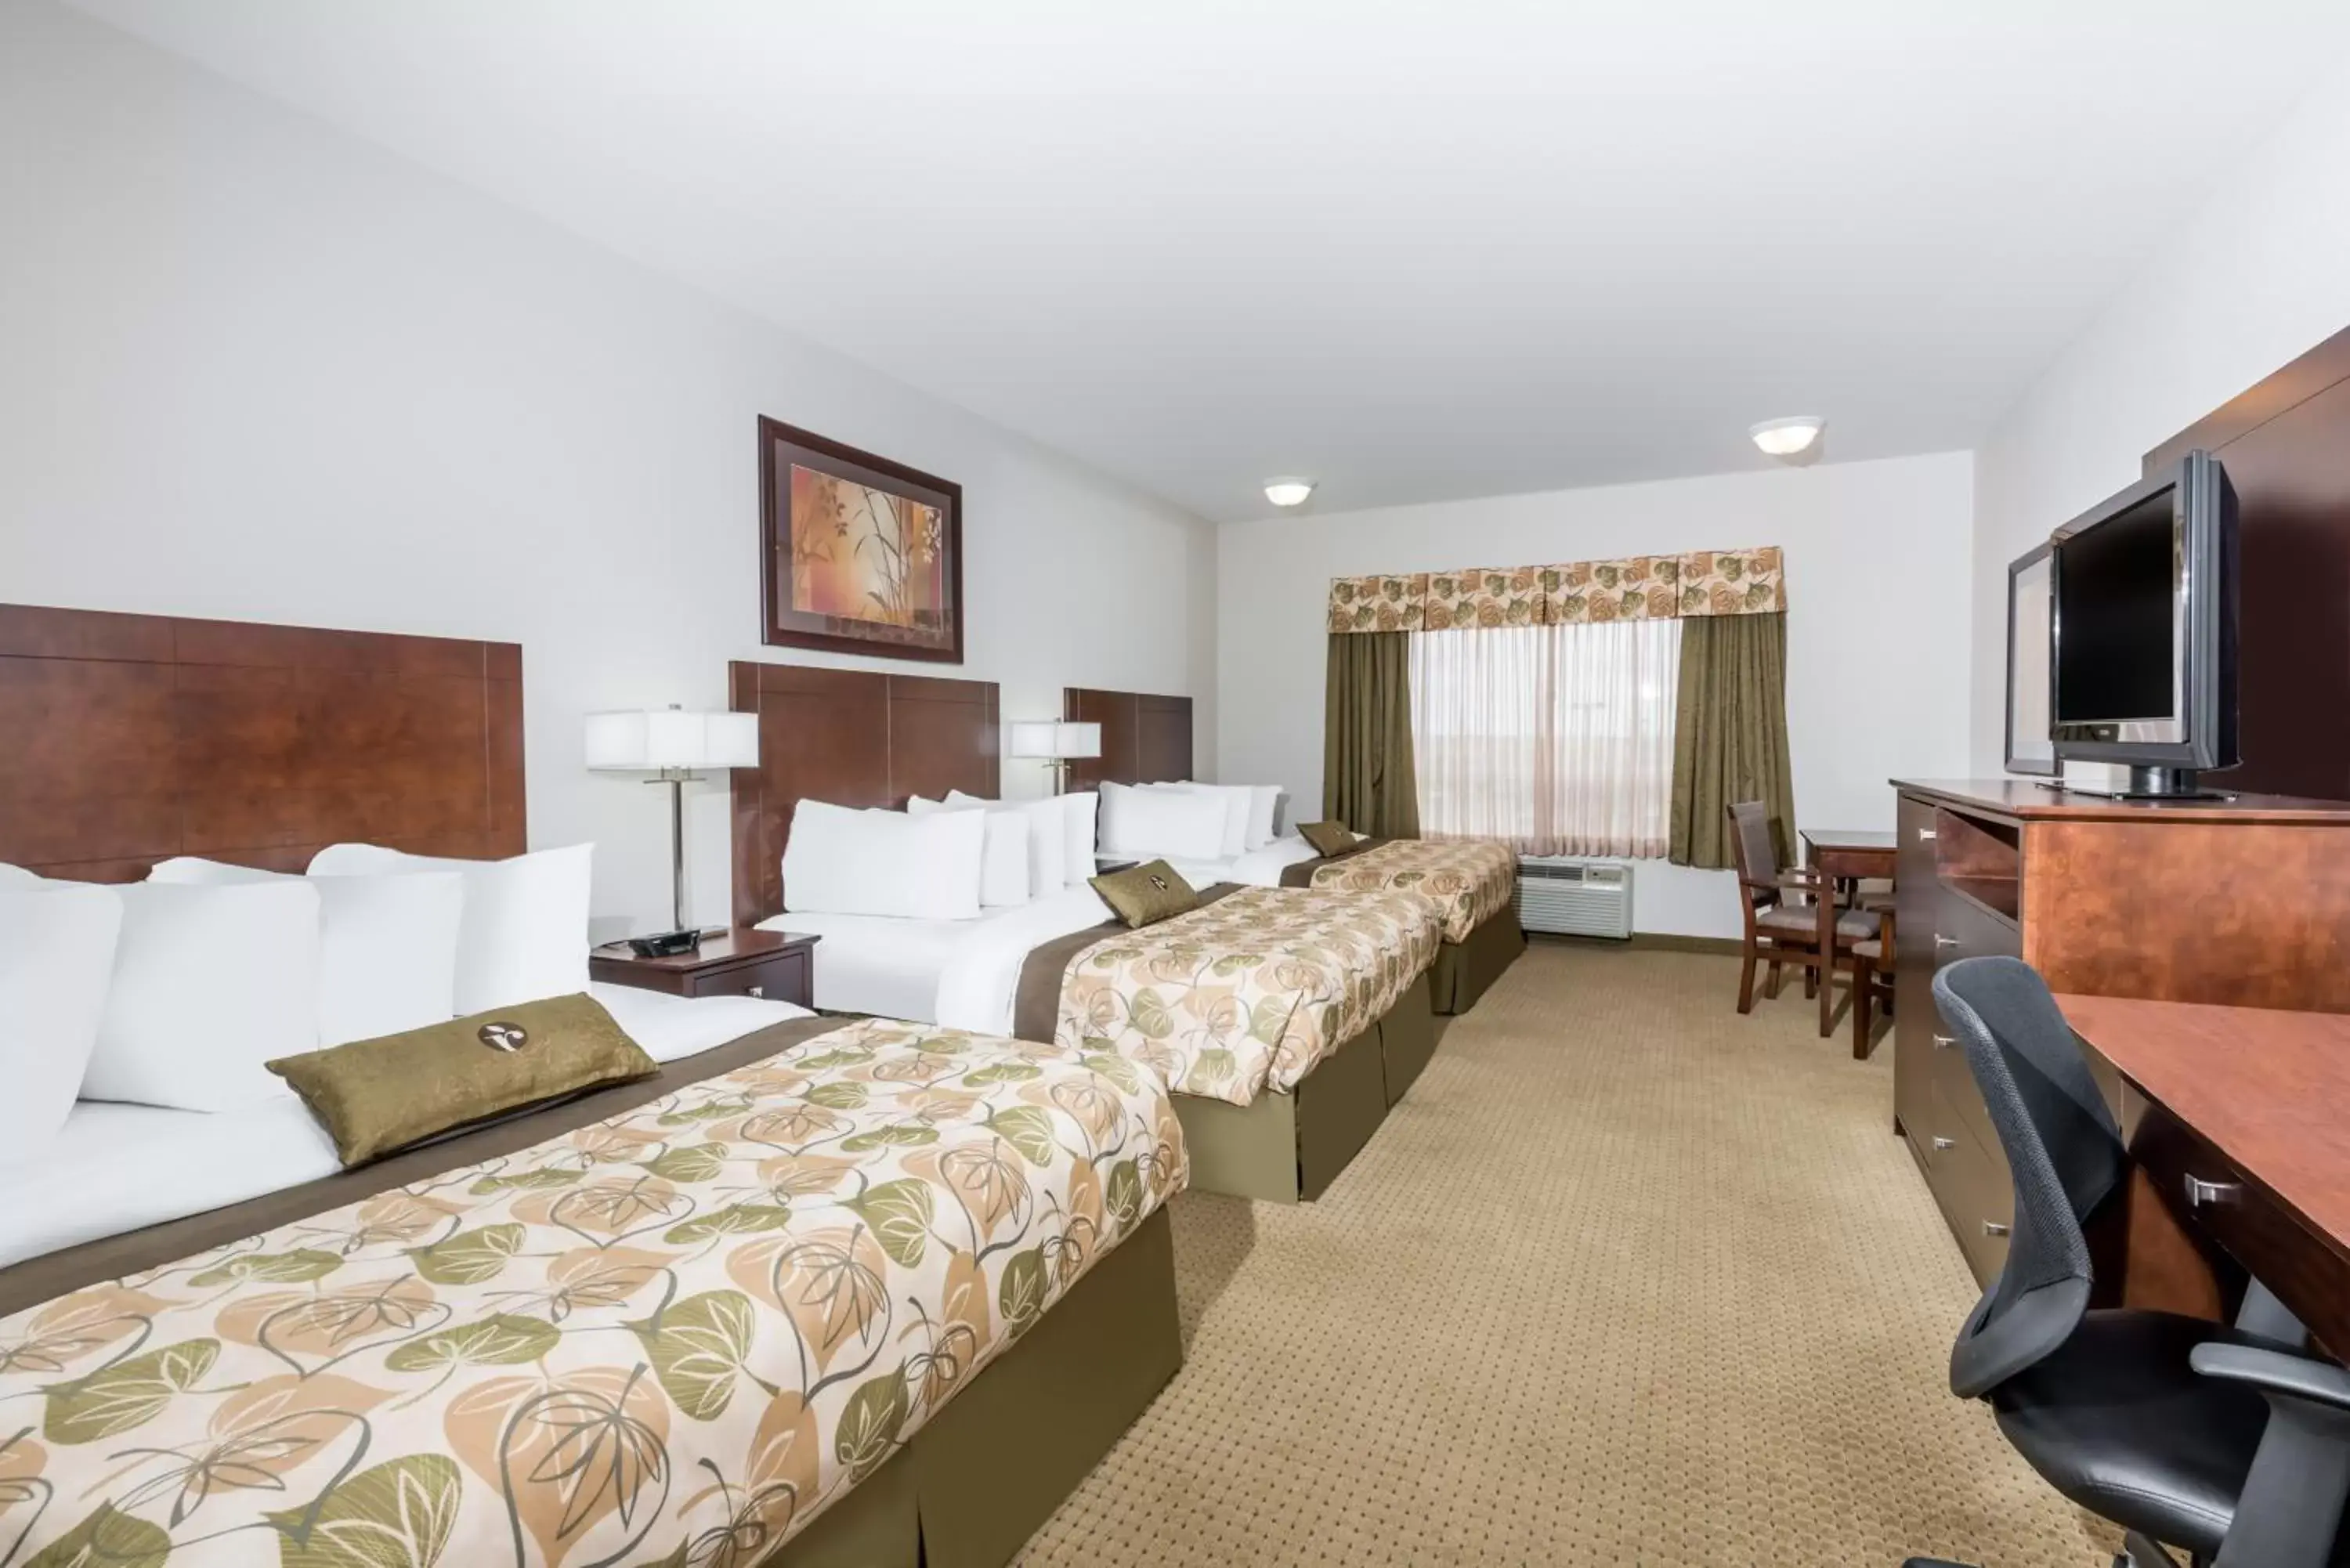 Bed, Room Photo in Ramada by Wyndham Olds